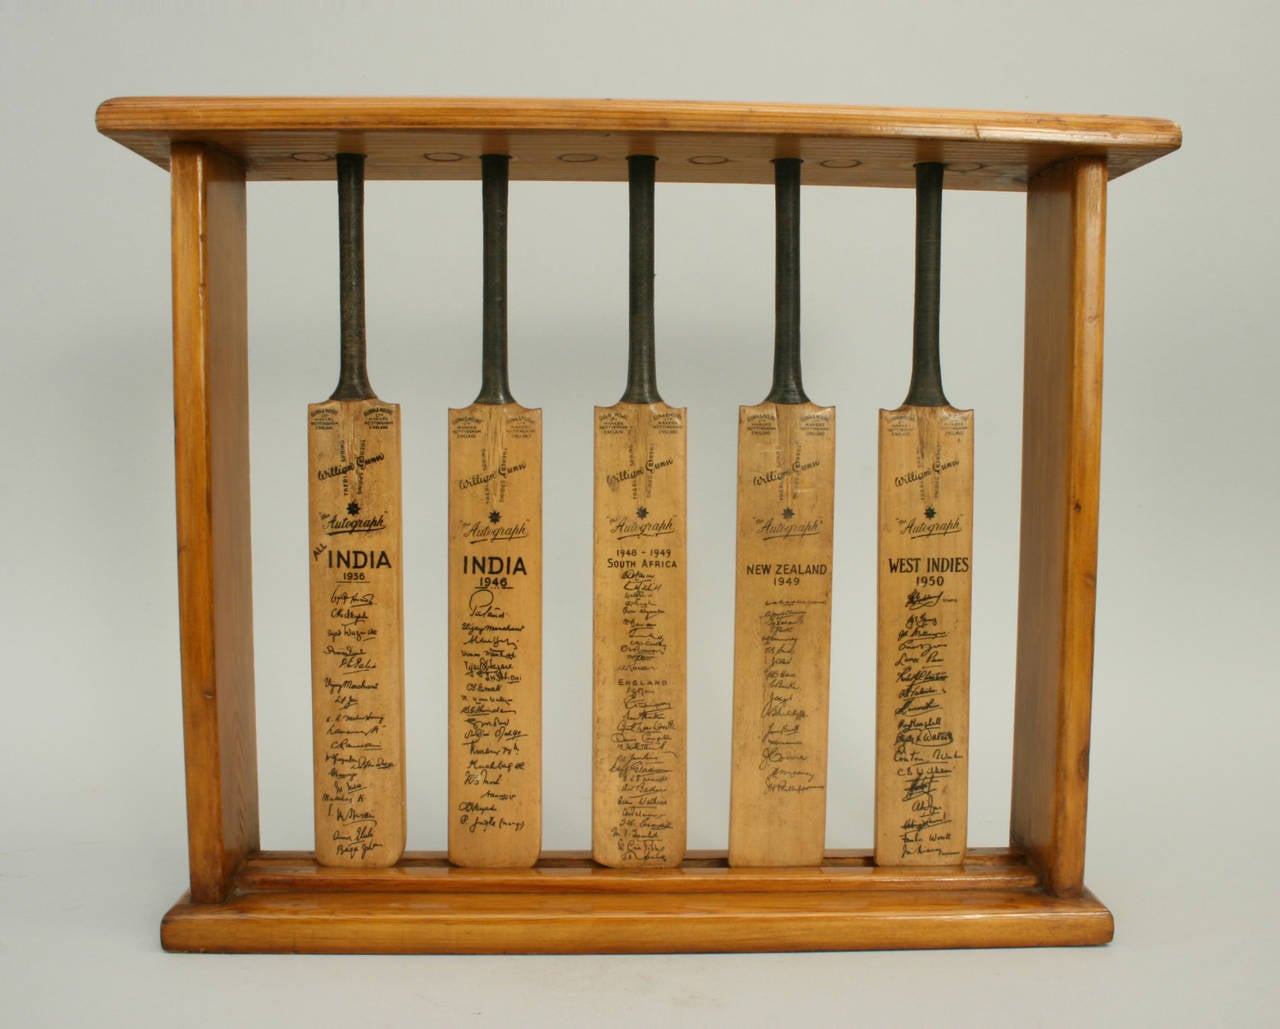 Gunn and Moore miniature cricket bat display. 
A set of five miniature Gunn and Moore Cricket bats in a polished pine display stand. The bats are ‘William Gunn “the AUTOGRAPH” bats all with facsimile signatures on the front and Gunn & Moore